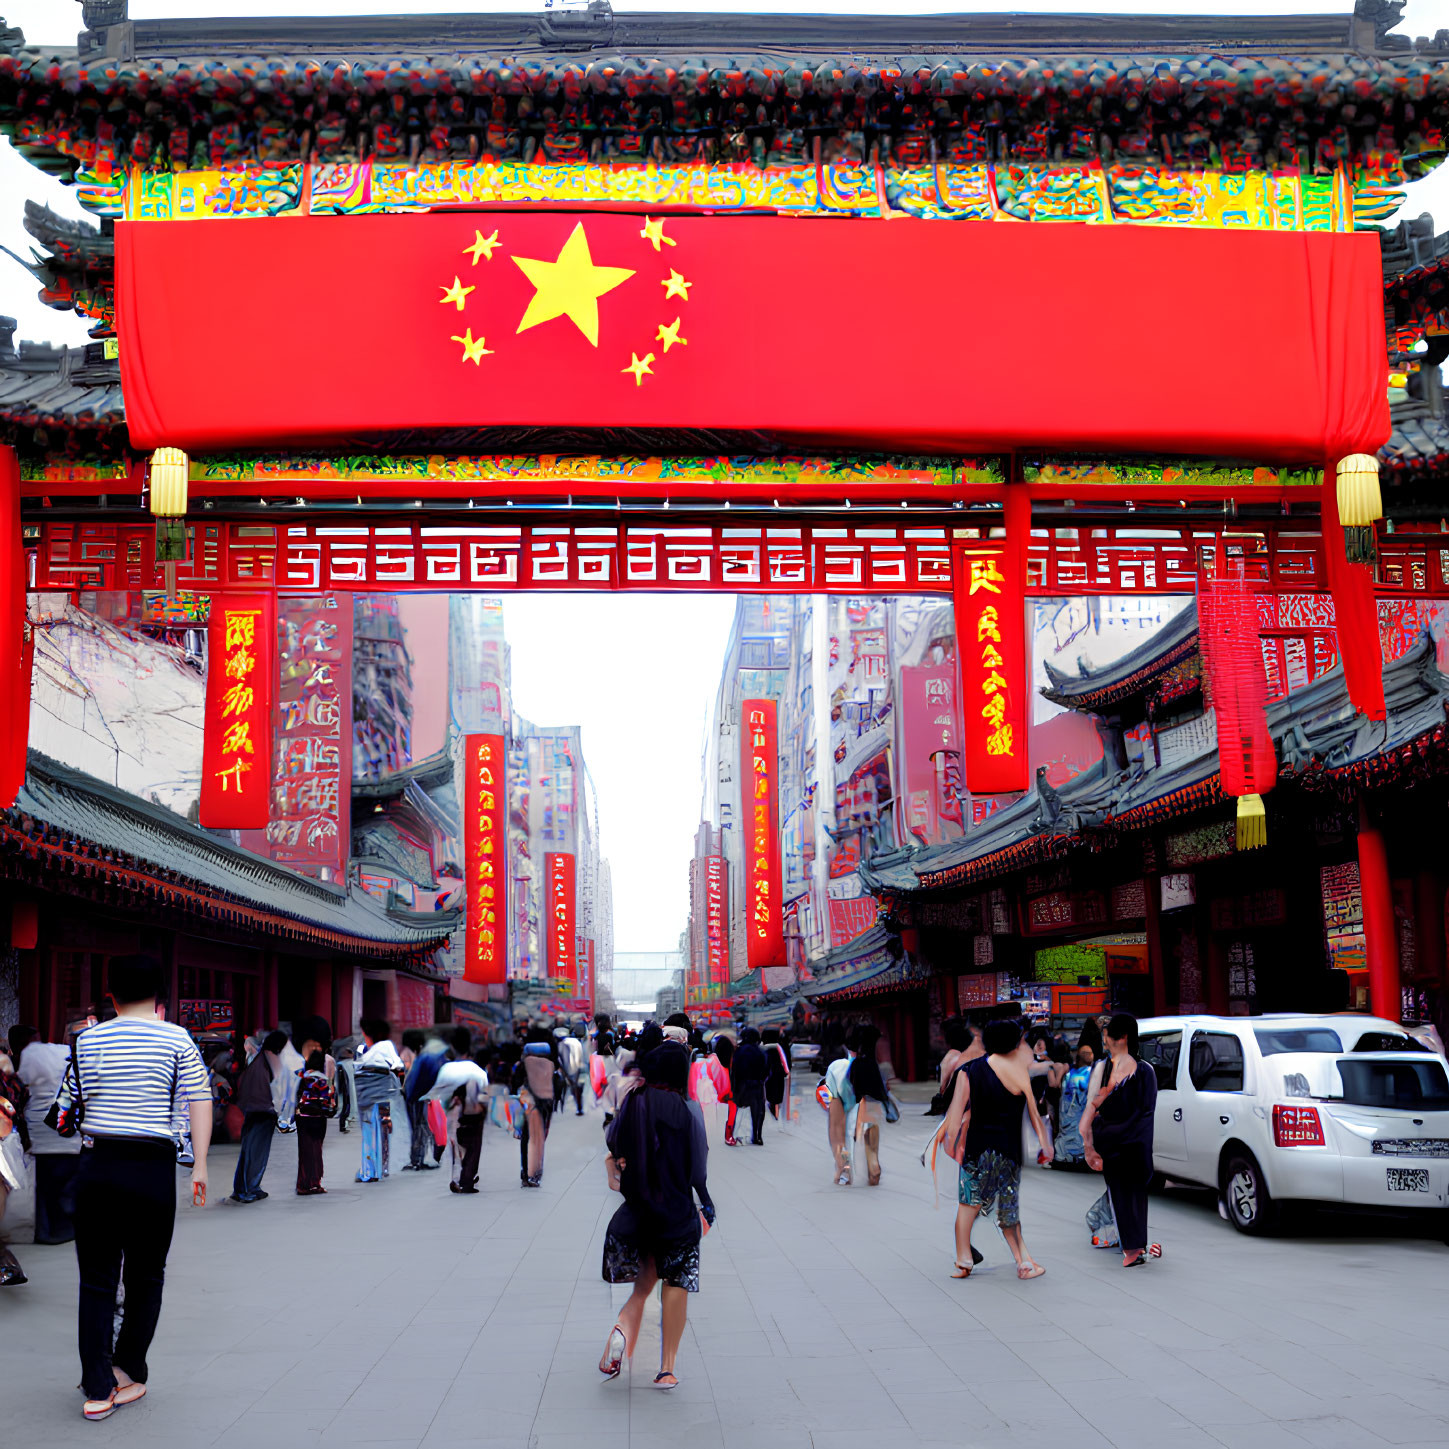 Traditional Chinese street with red banner and yellow star, bustling with activity